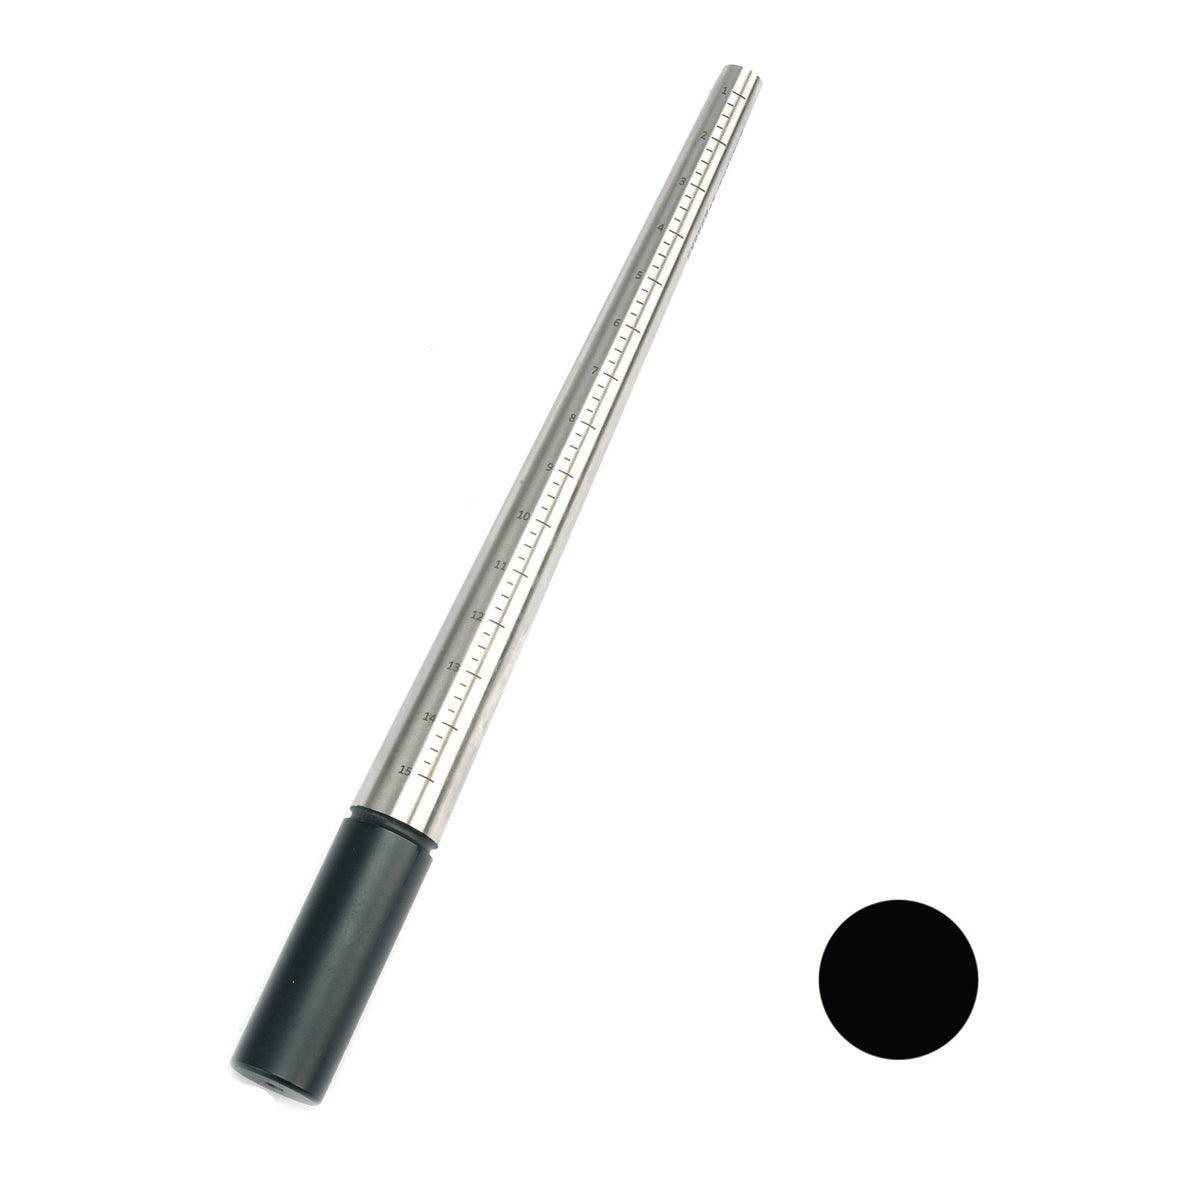 Steel Ring Mandrel Graduated In USA sizes 1 To 15 By 1/4 Size-No Groove